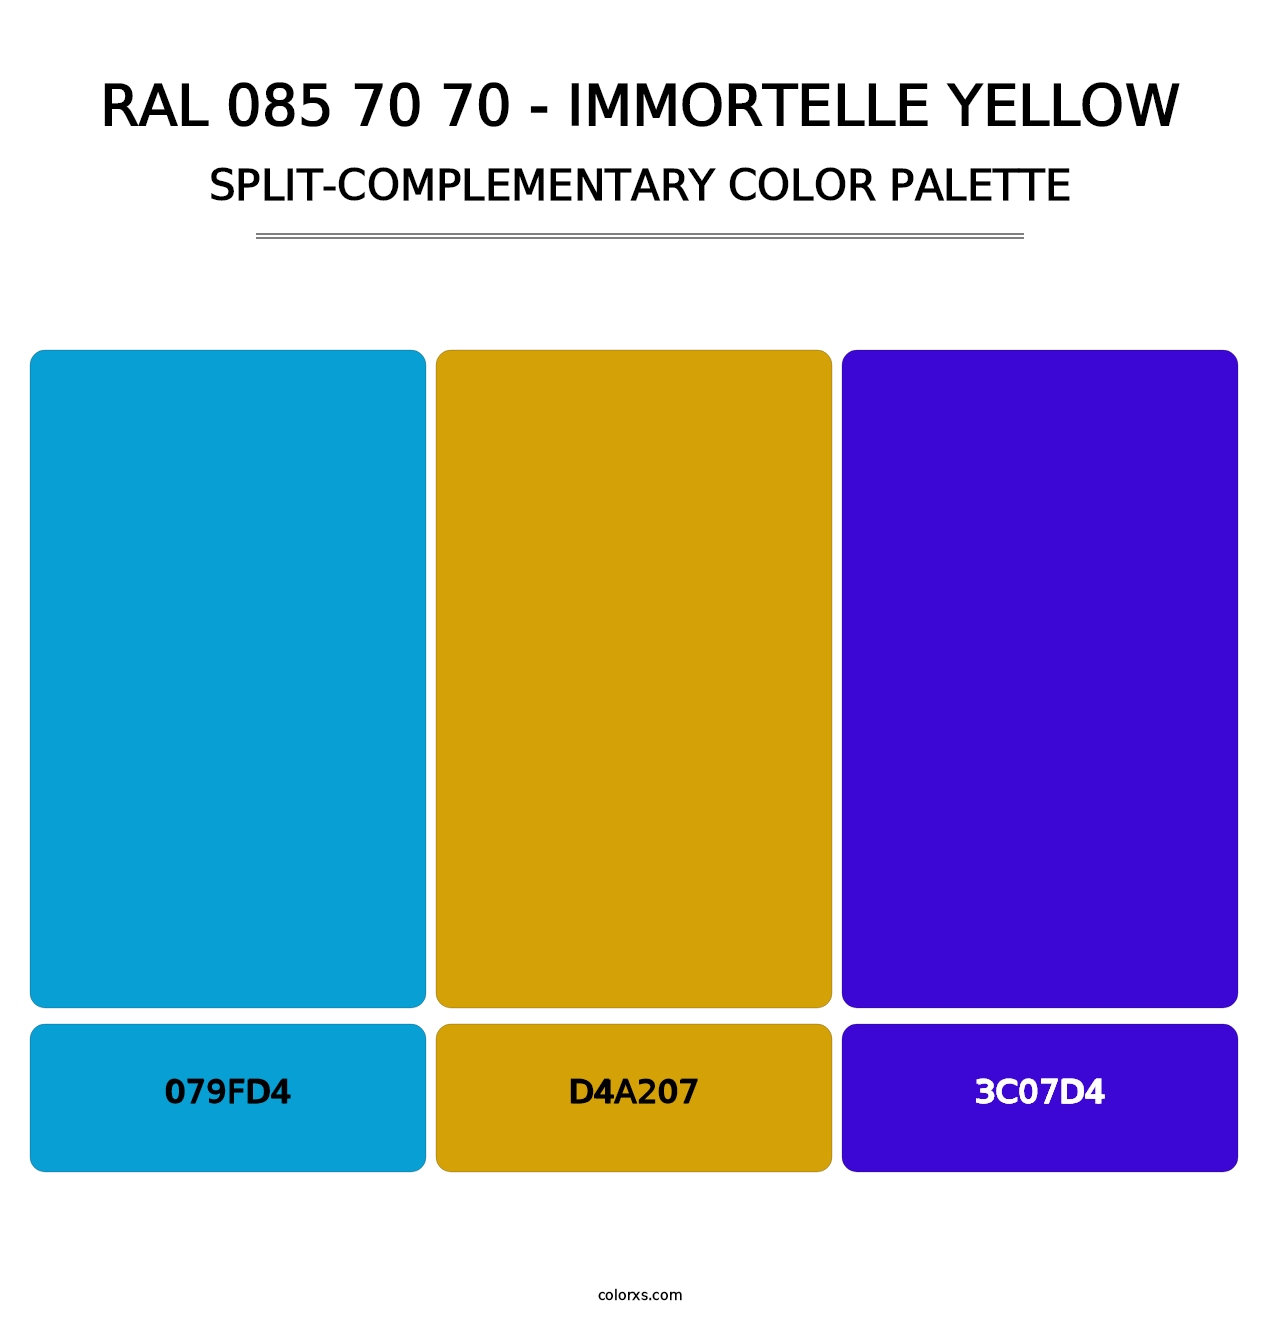 RAL 085 70 70 - Immortelle Yellow - Split-Complementary Color Palette